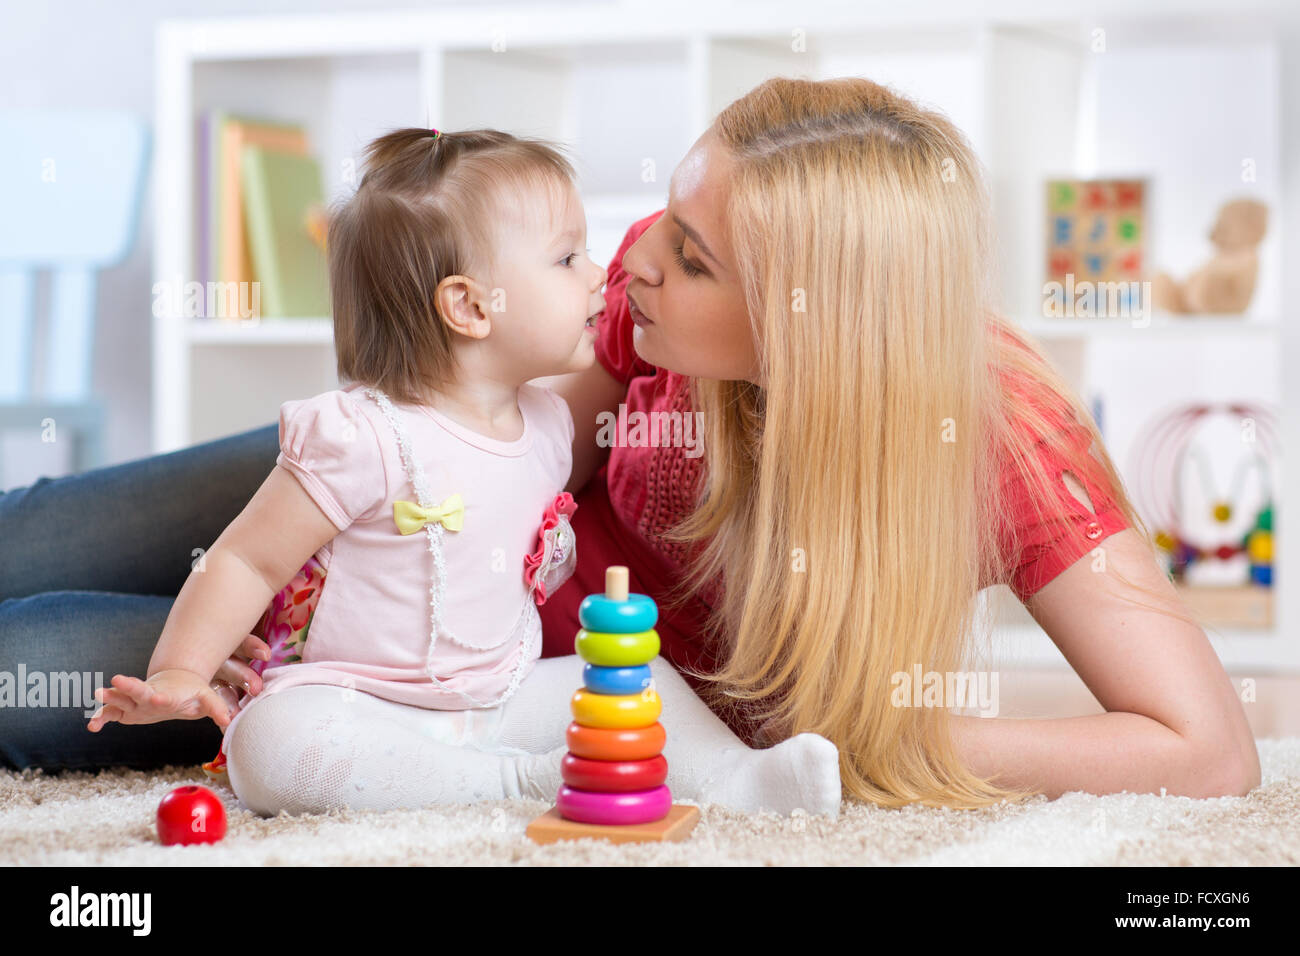 Mother and daughter indoors playing and smiling Stock Photo